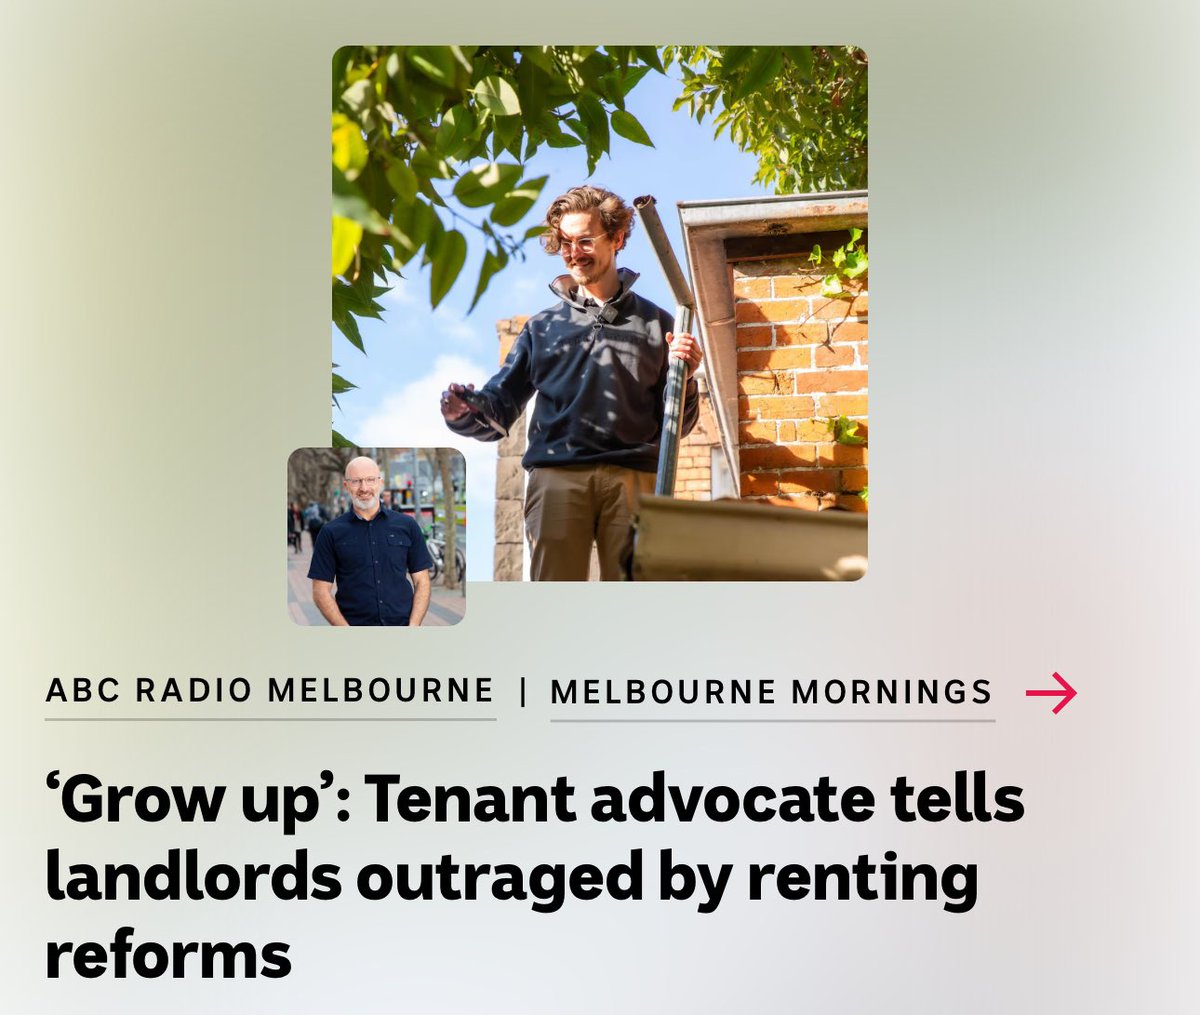 Surprised they didn’t go with: “sell your fucking investment”: tenant advocate tells landlords - because I did say that